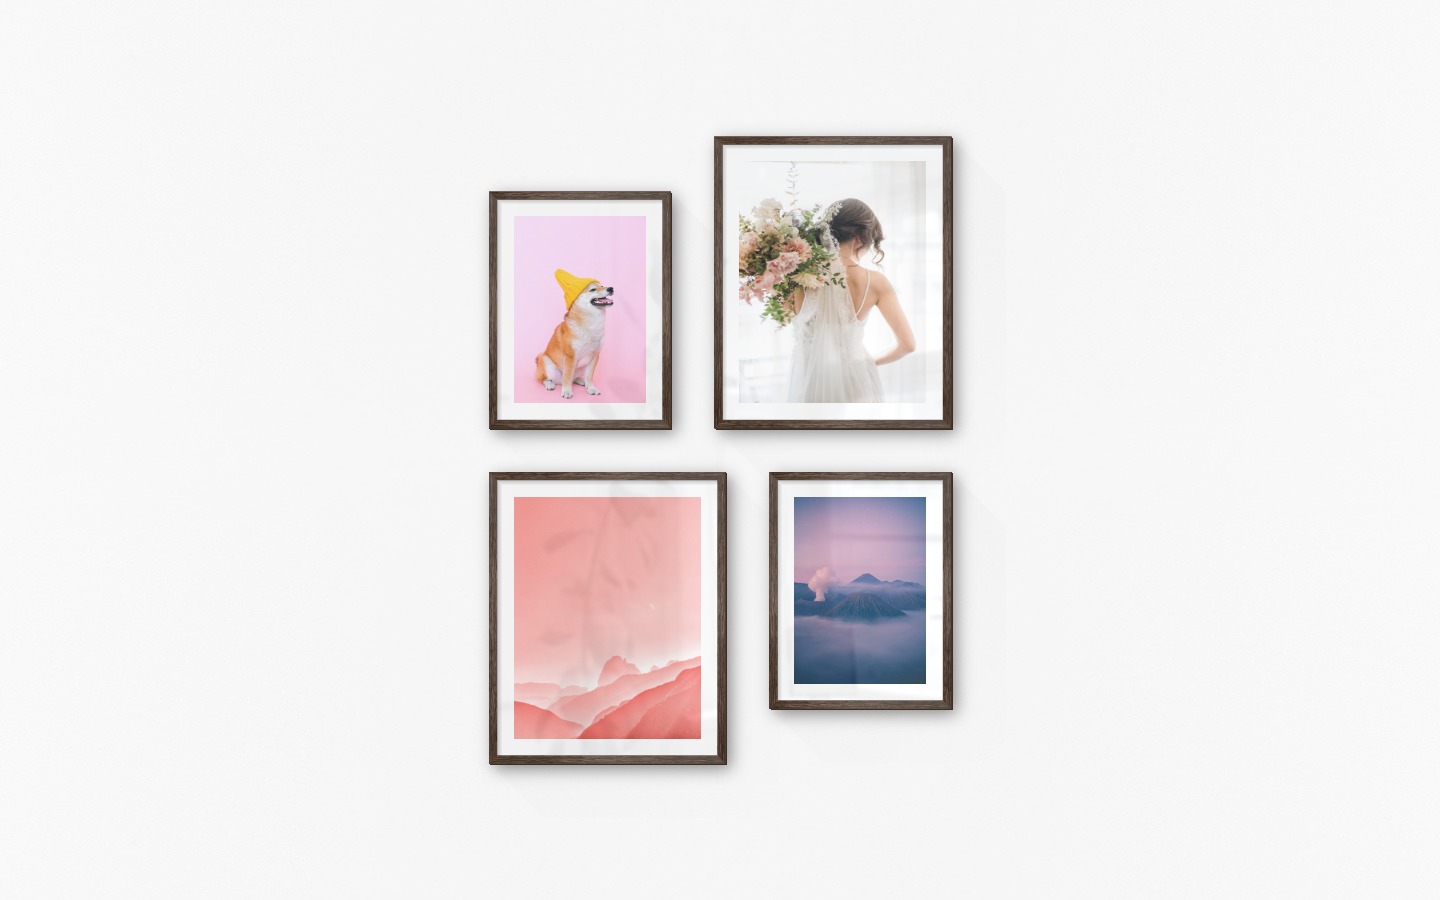 Gallery wall with picture frames in dark wood in sizes 30x40 and 40x50 with prints "Dog with yellow hat", "Bride and flowers", "Pink sky" and "Mountains above the clouds"